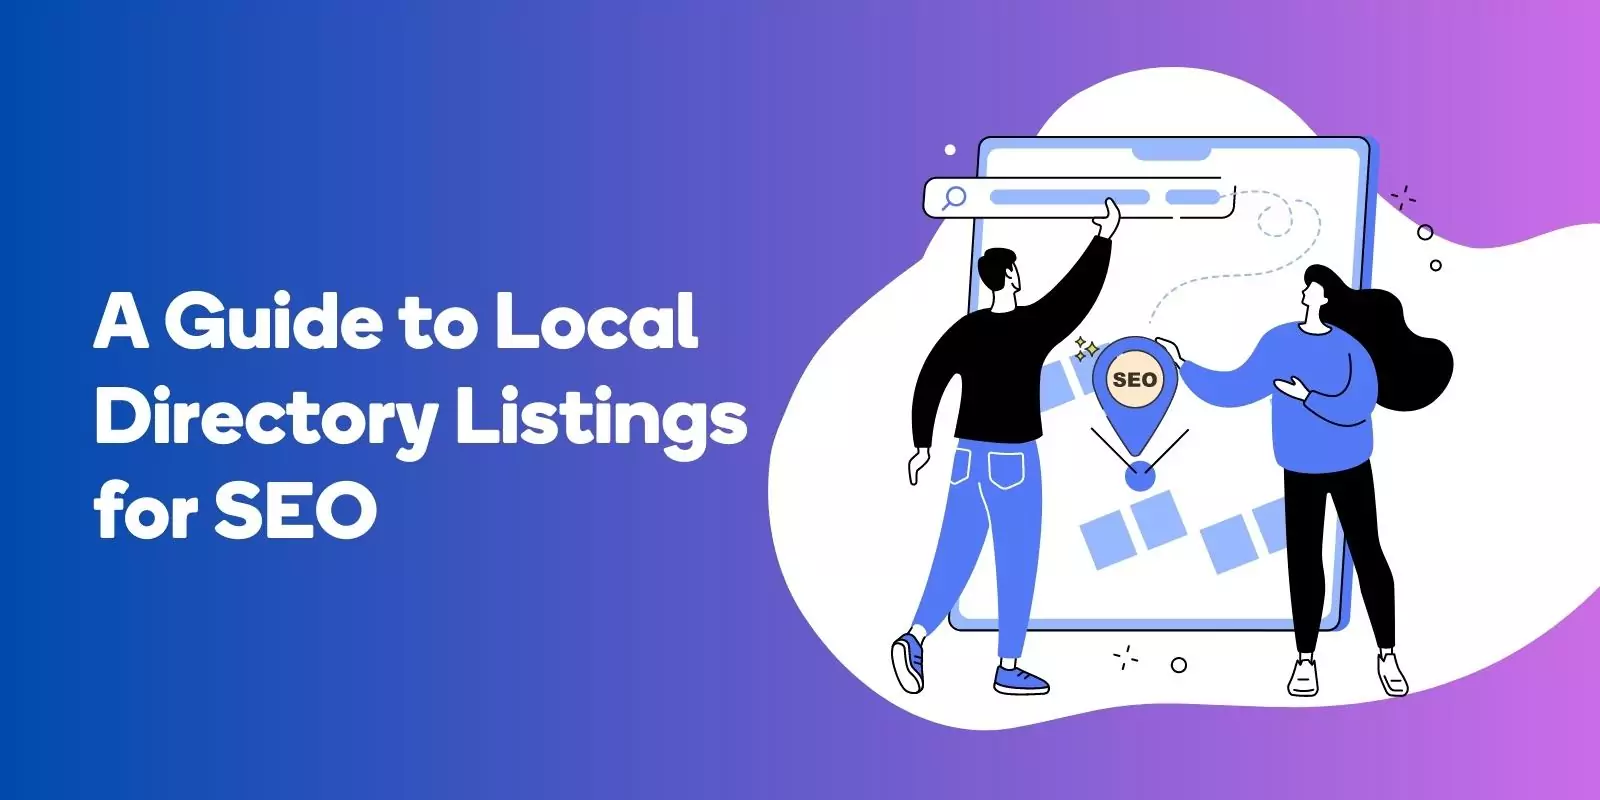 A Guide to Local Directory Listings for SEO